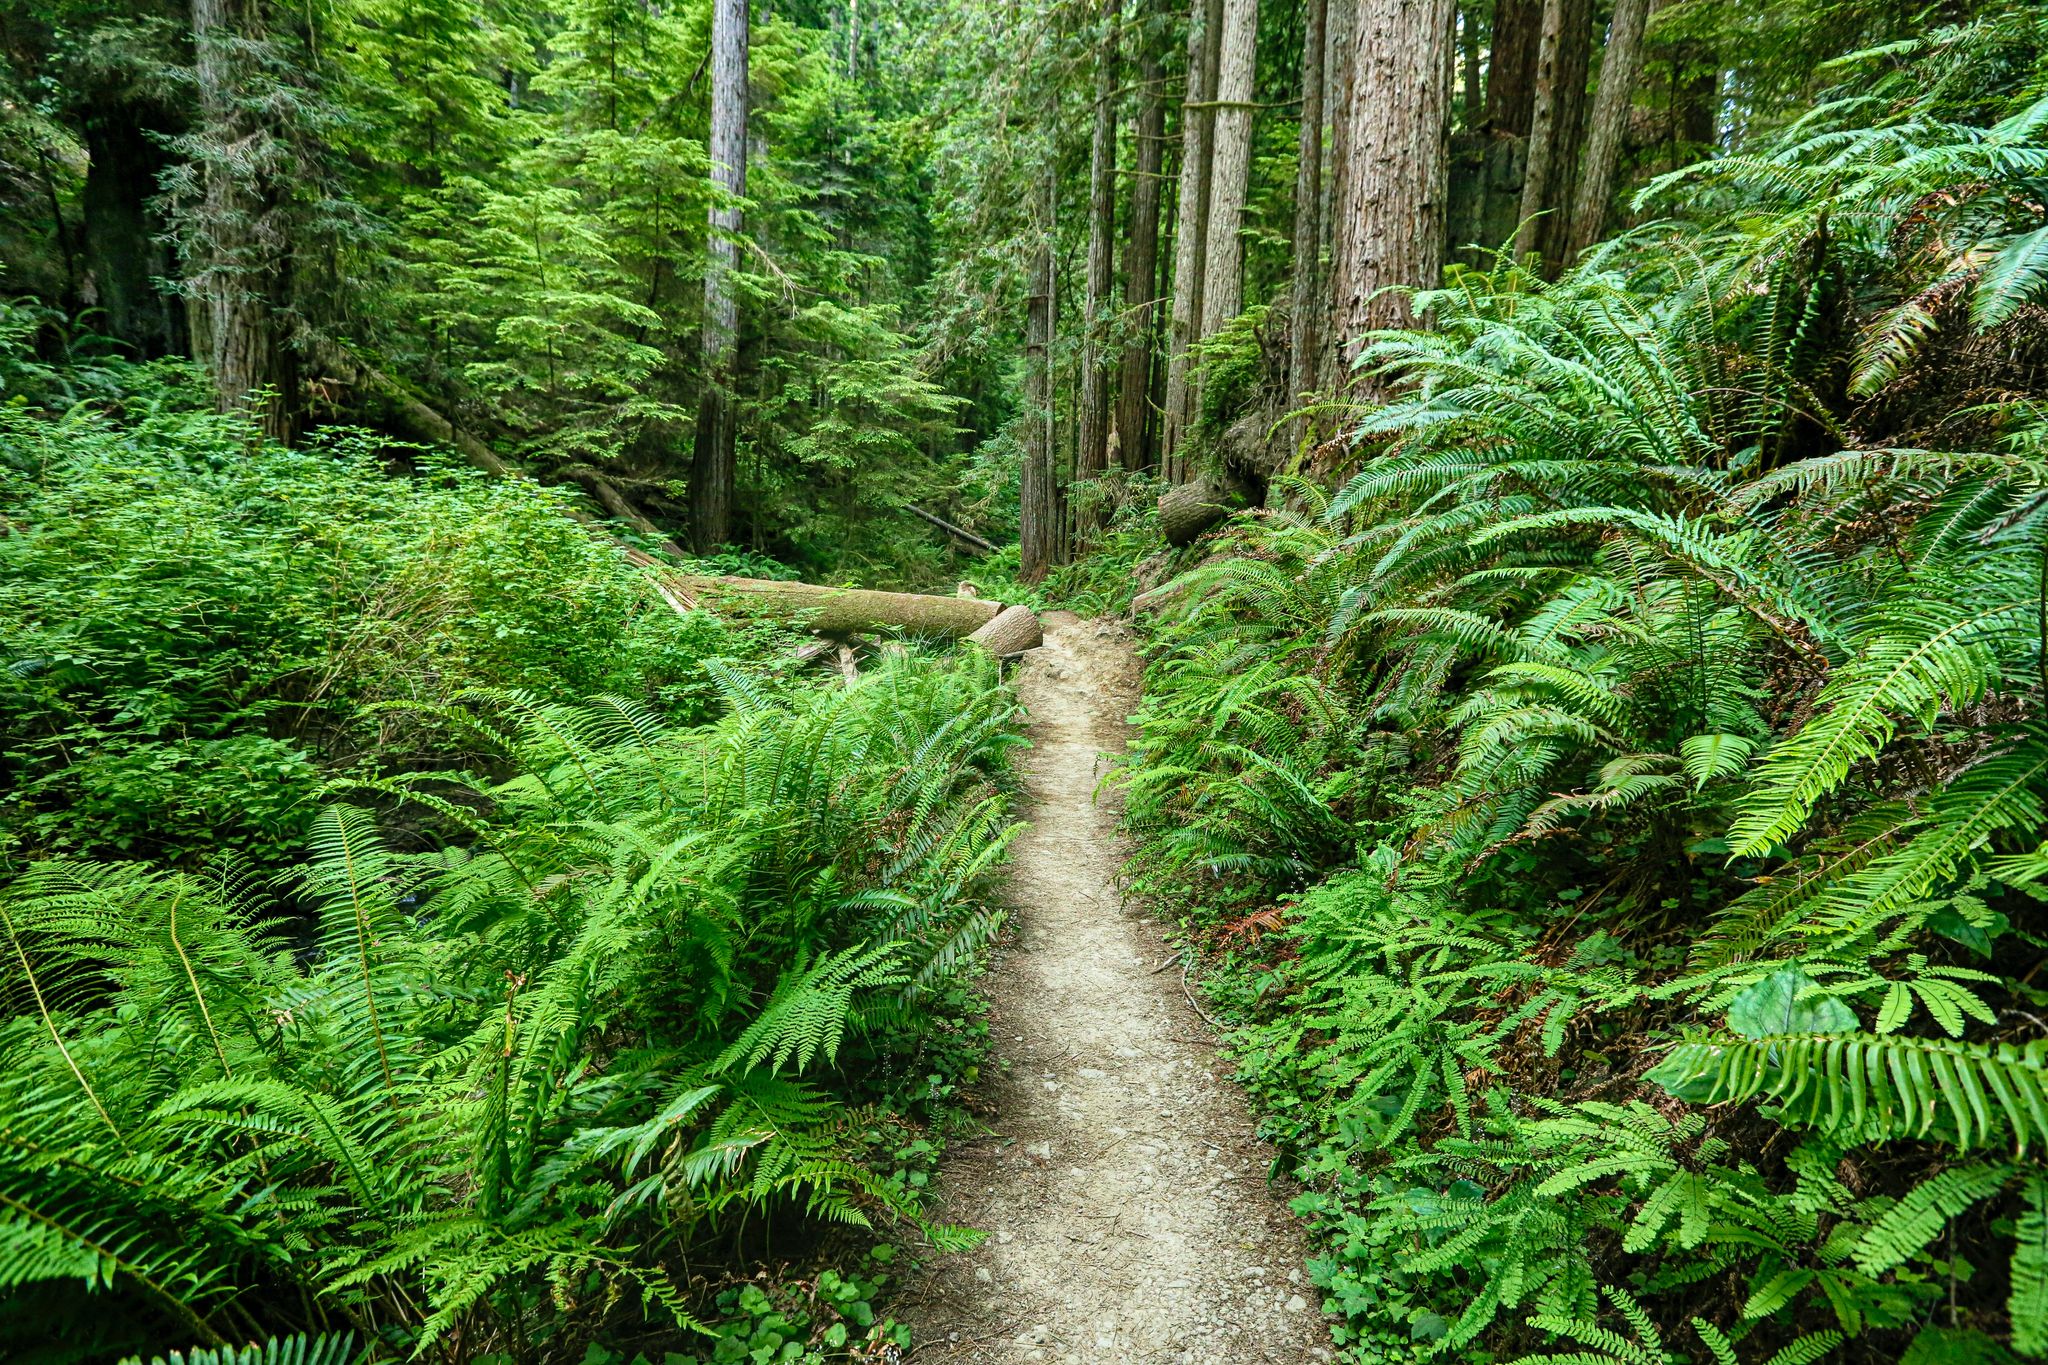 A brilliant fern gully along the trail of a new growth redwood forest in Russian Gulch State Park.